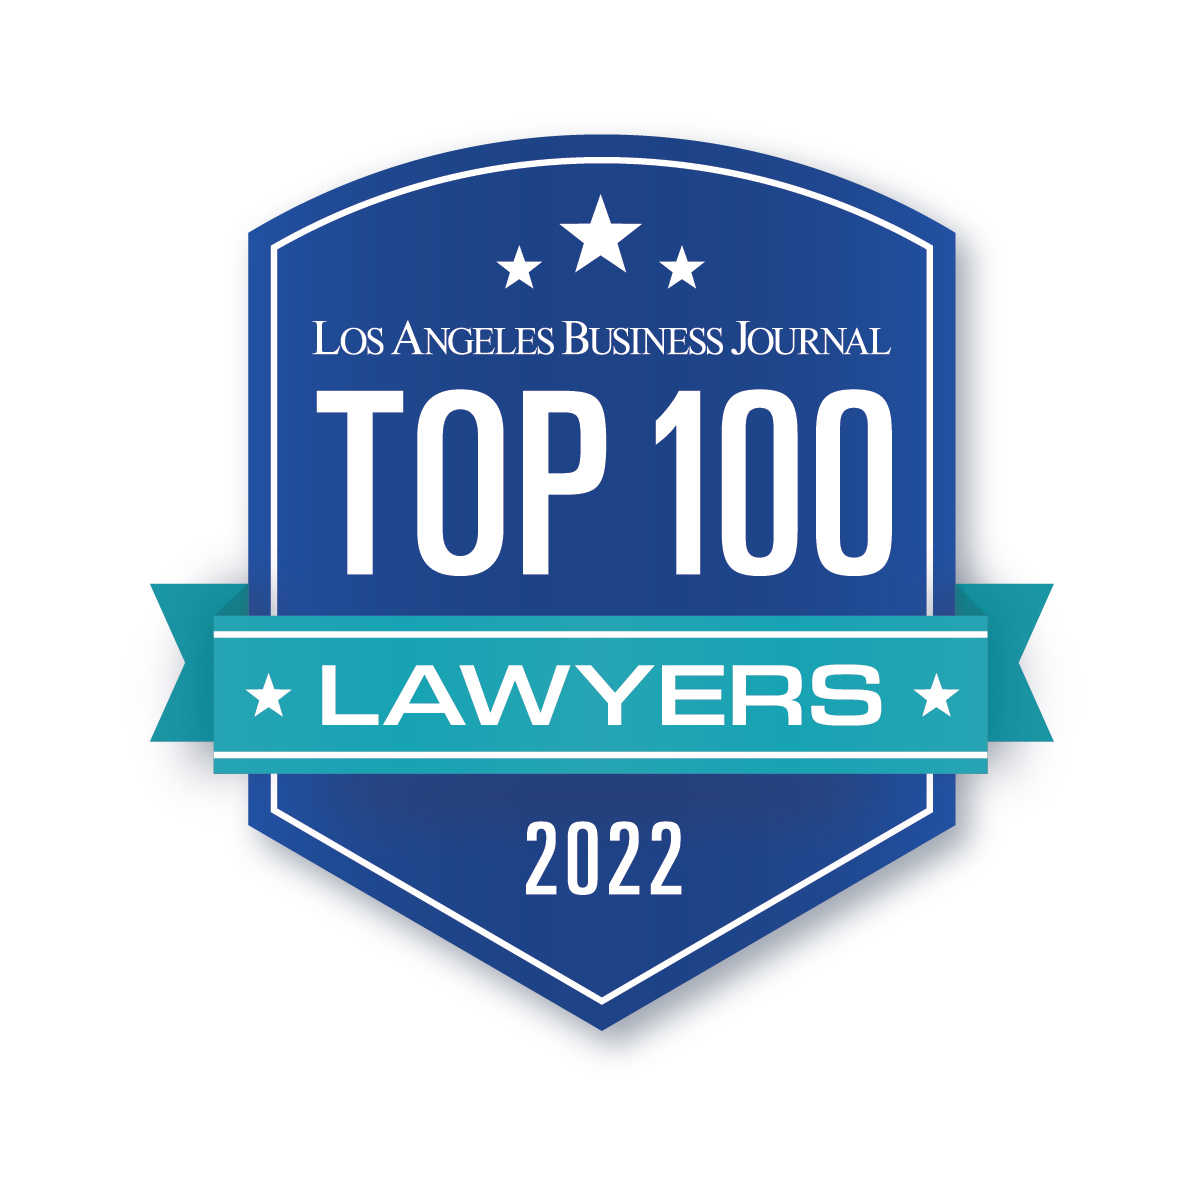 2022 Top 100 Lawyers